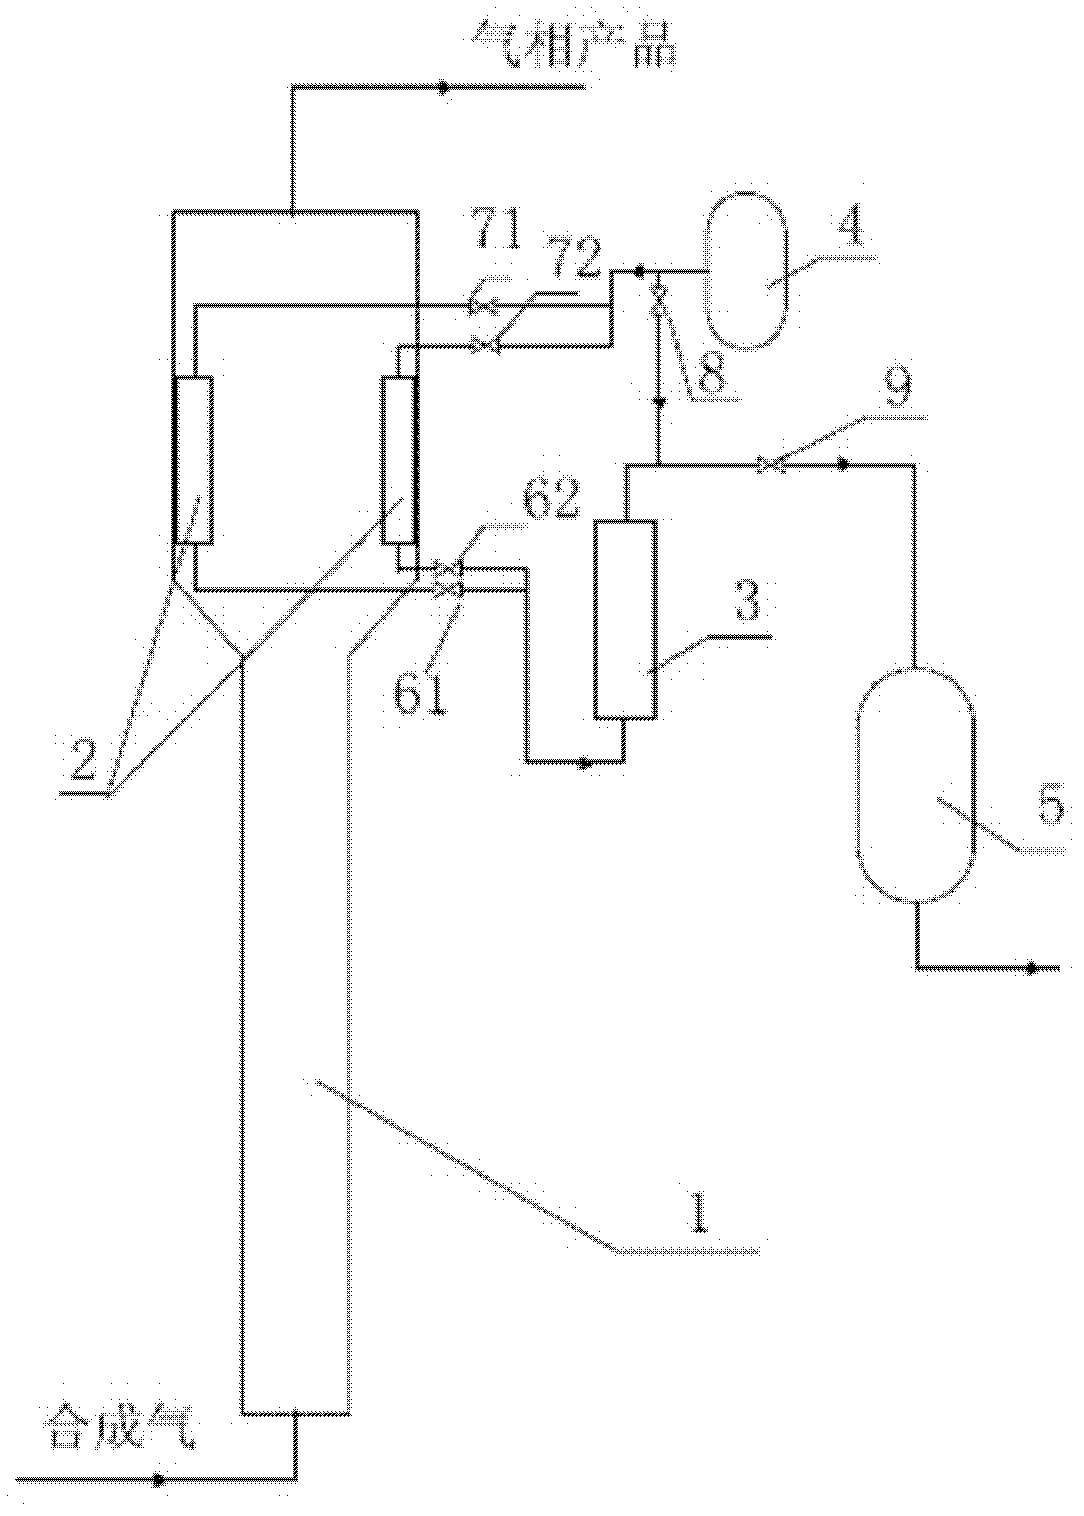 Product filtering system for three-phase slurry bed reactor